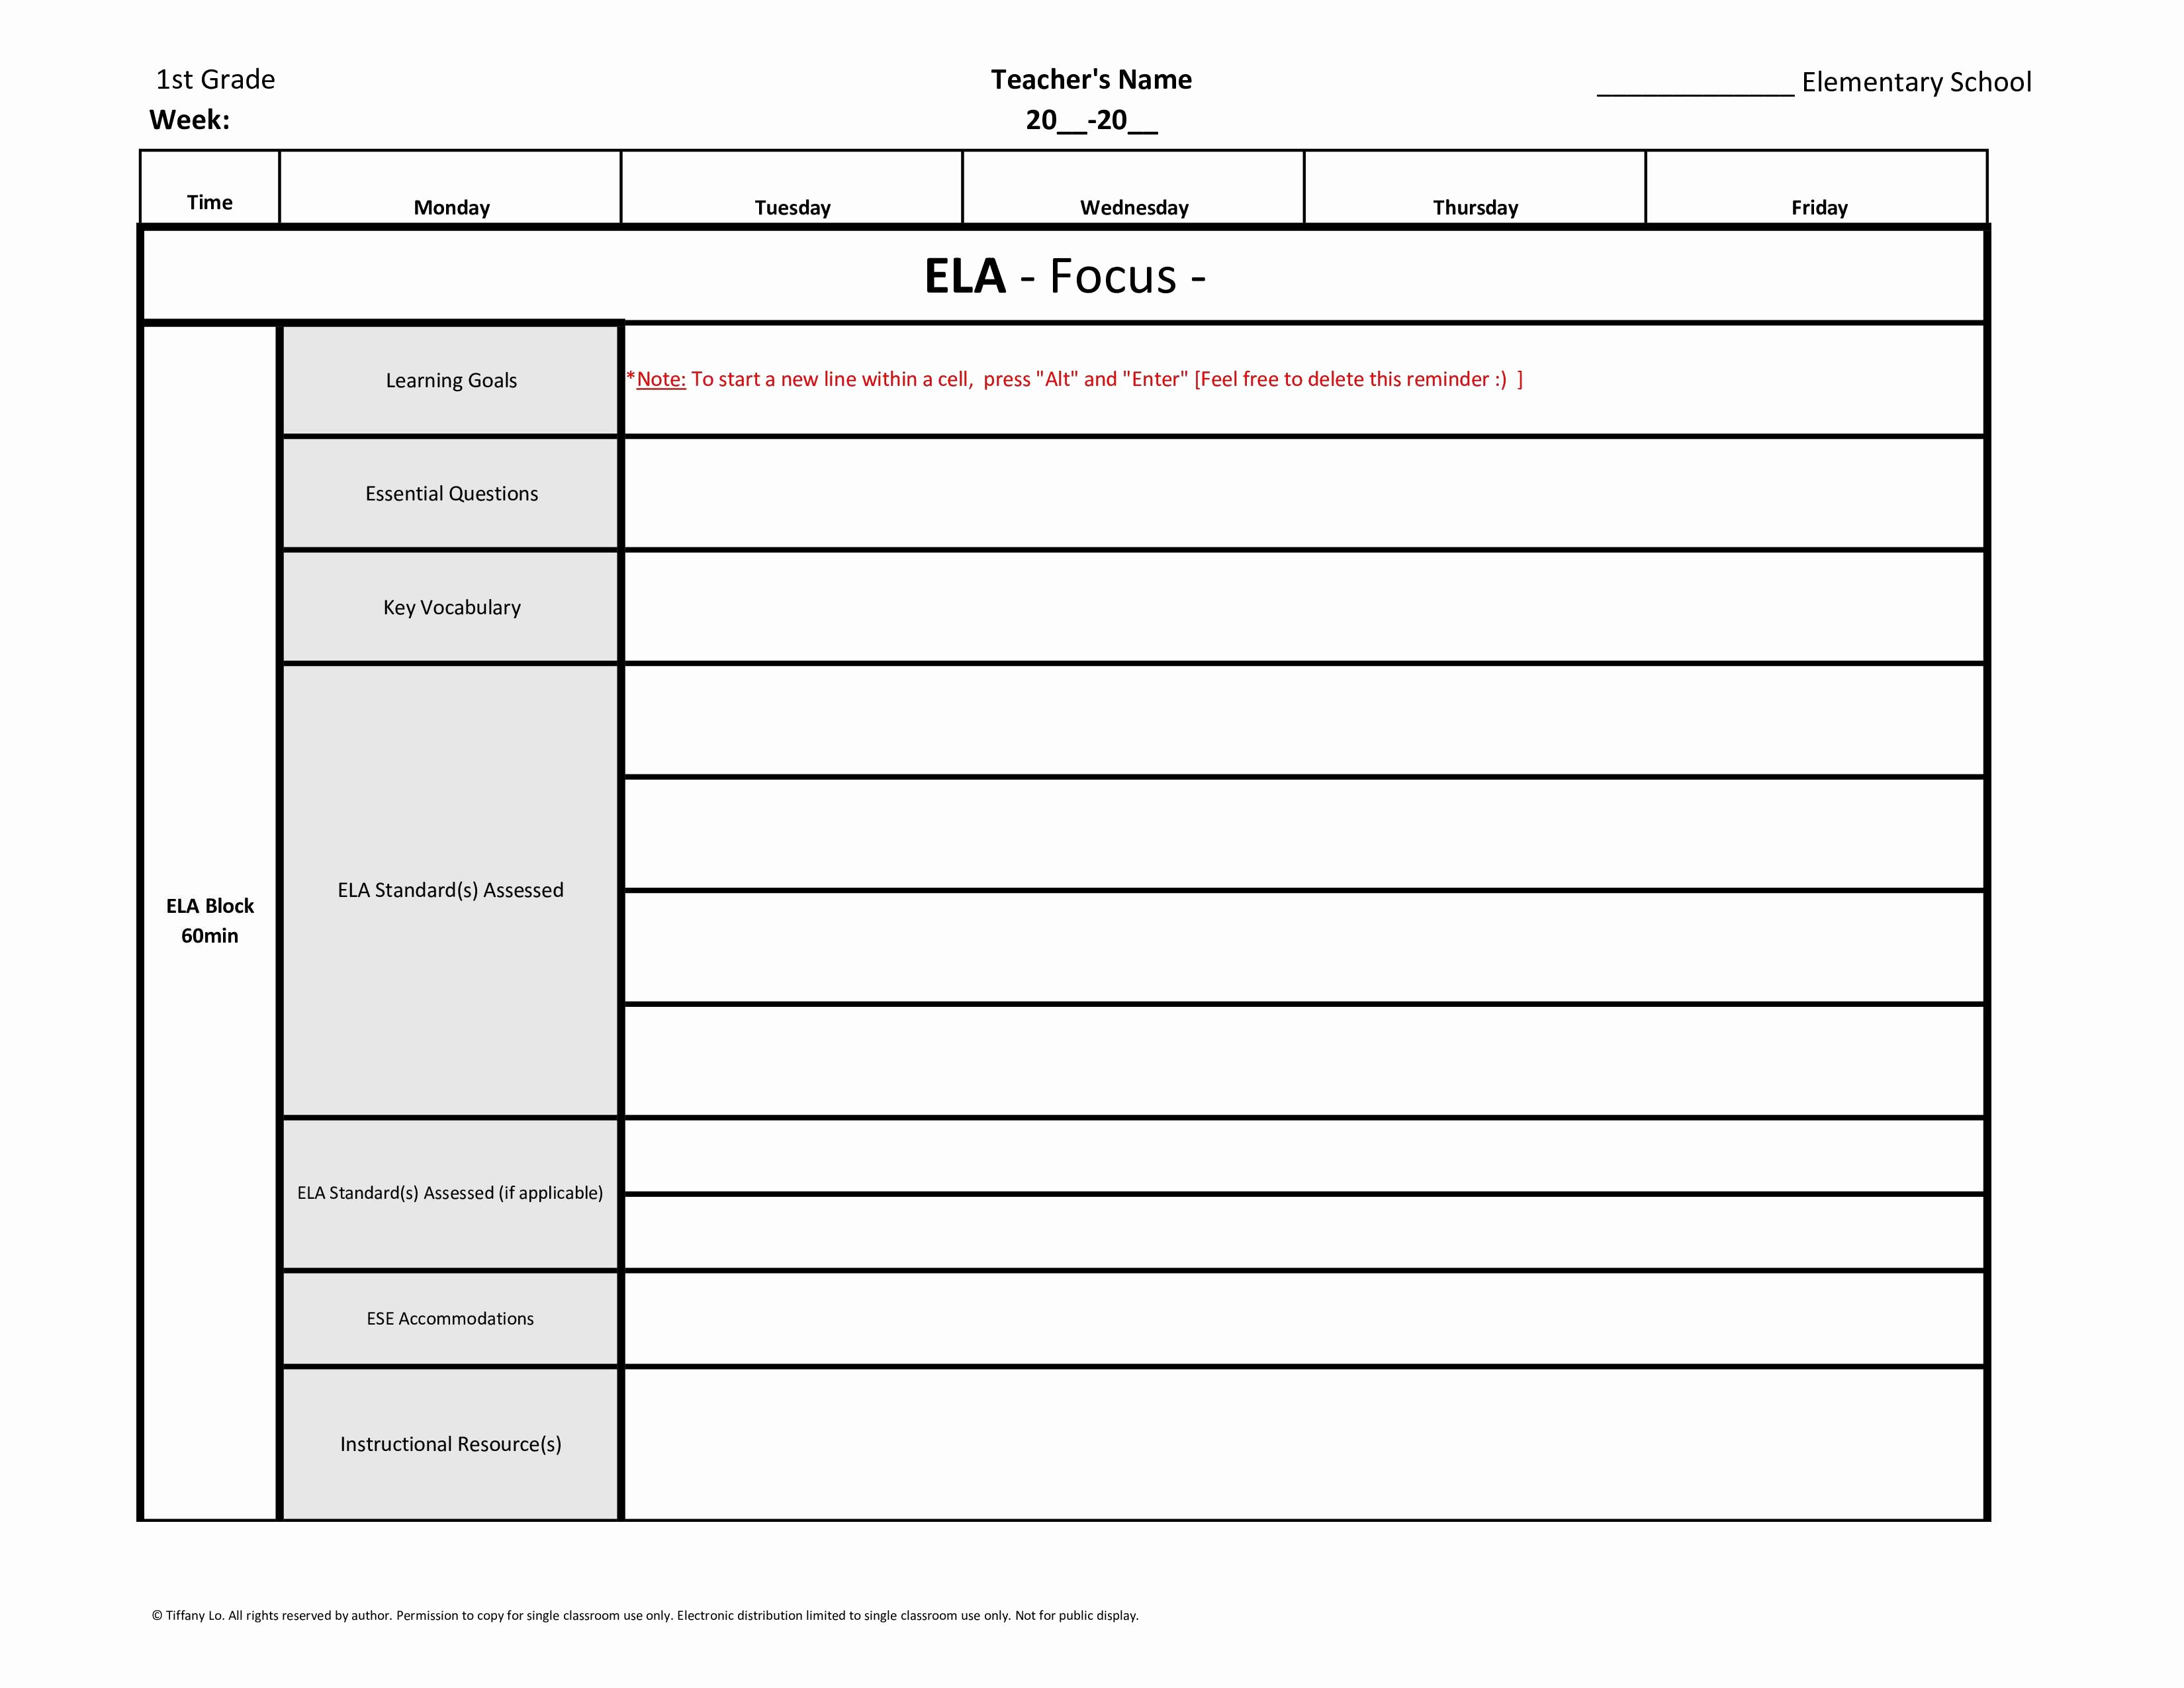 1st Grade Lesson Plan Template New 1st First Grade Weekly Lesson Plan Template W Florida